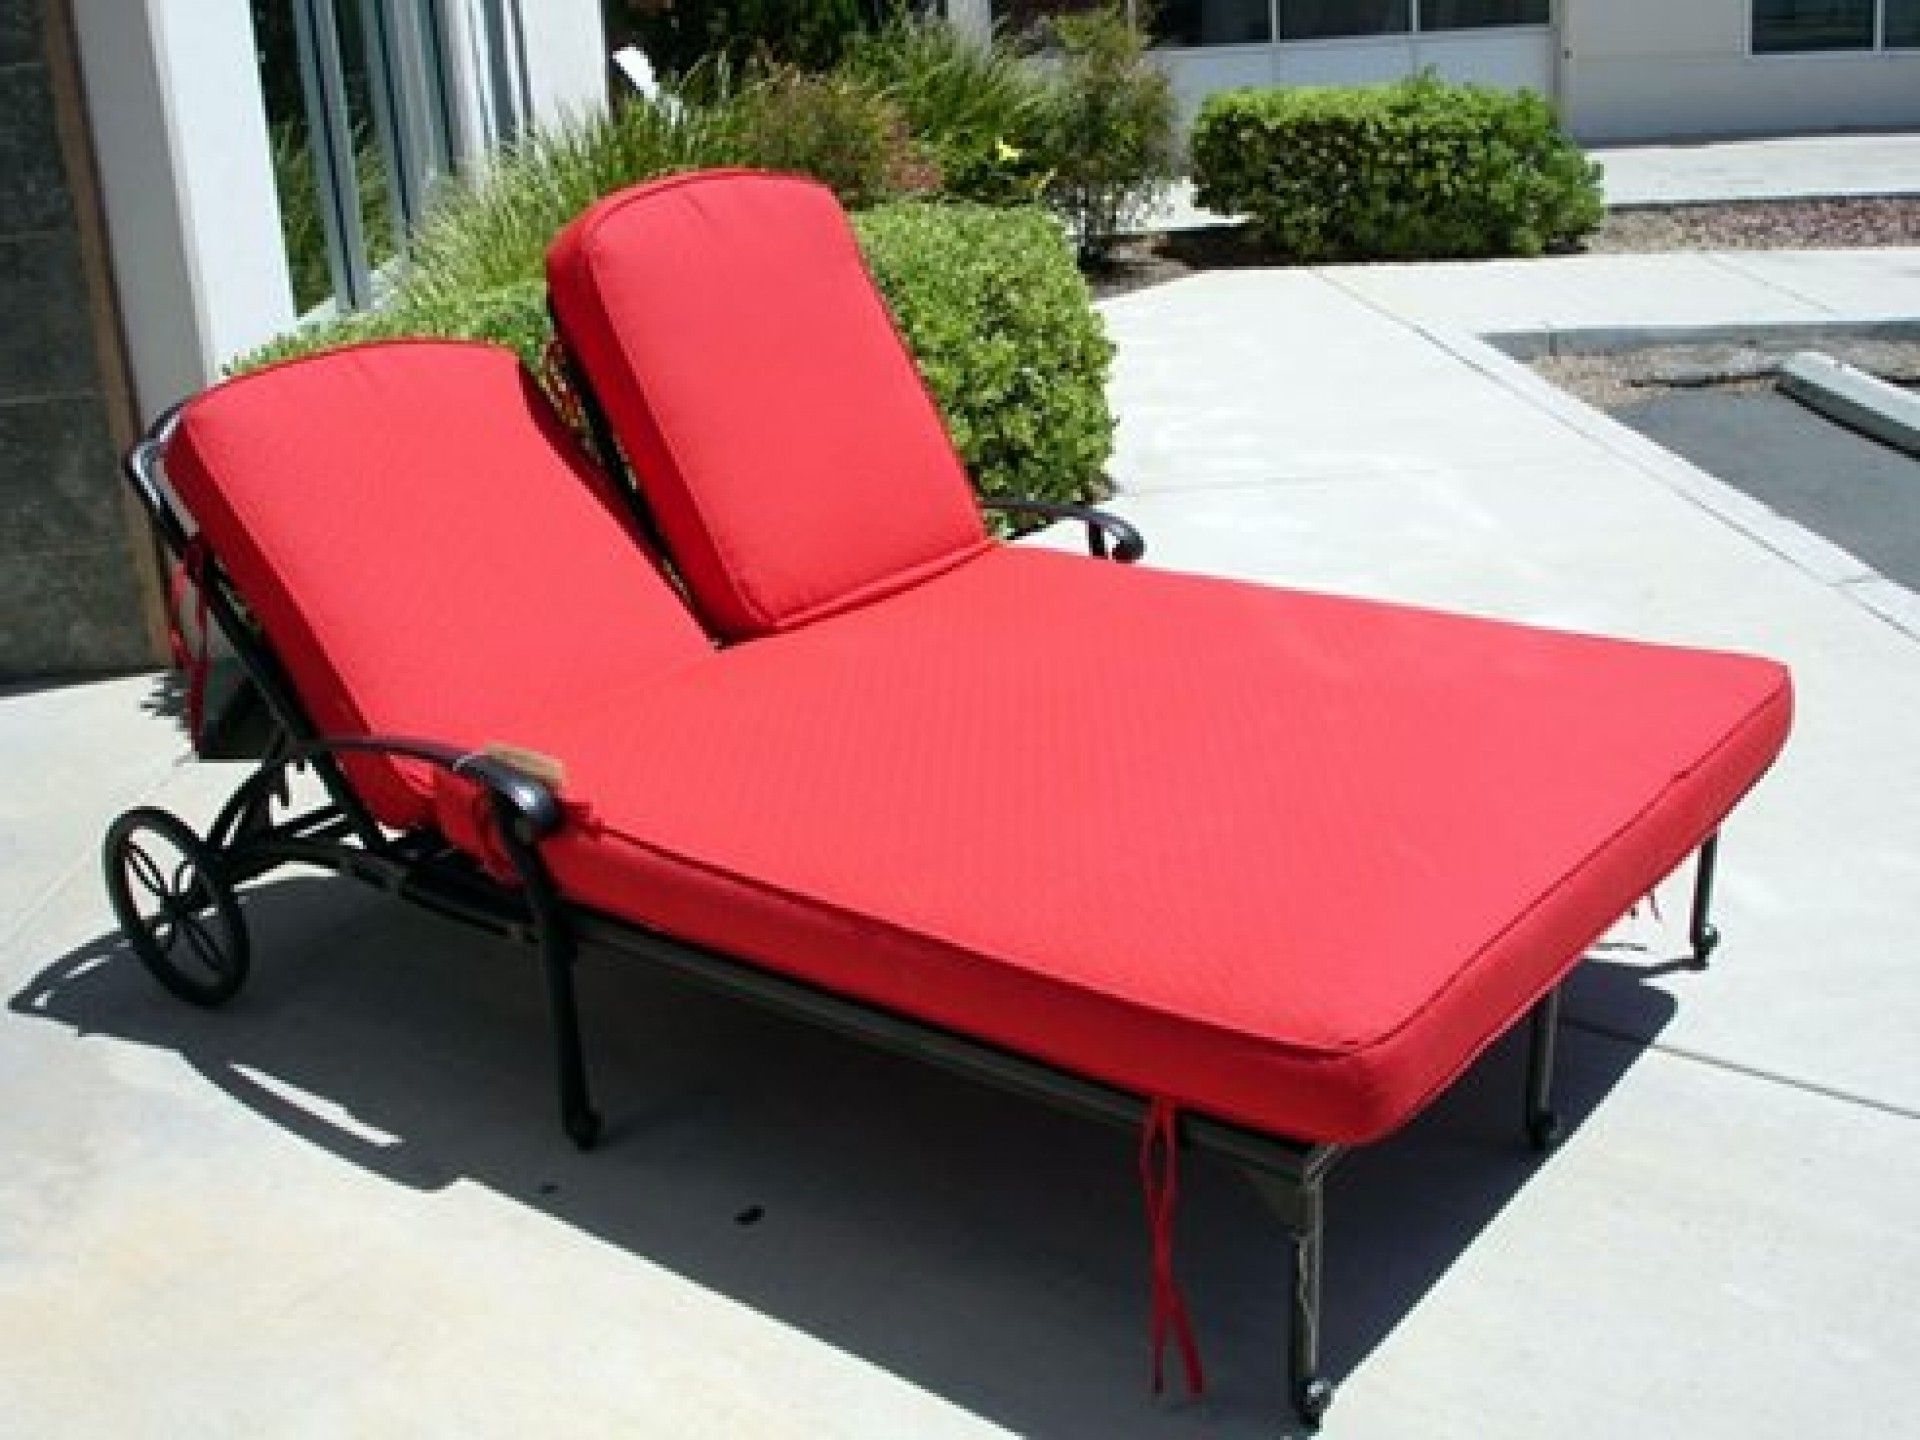 Well Liked Cushion For Chaise Lounge Chair • Lounge Chairs Ideas Throughout Double Chaise Cushions (View 3 of 15)